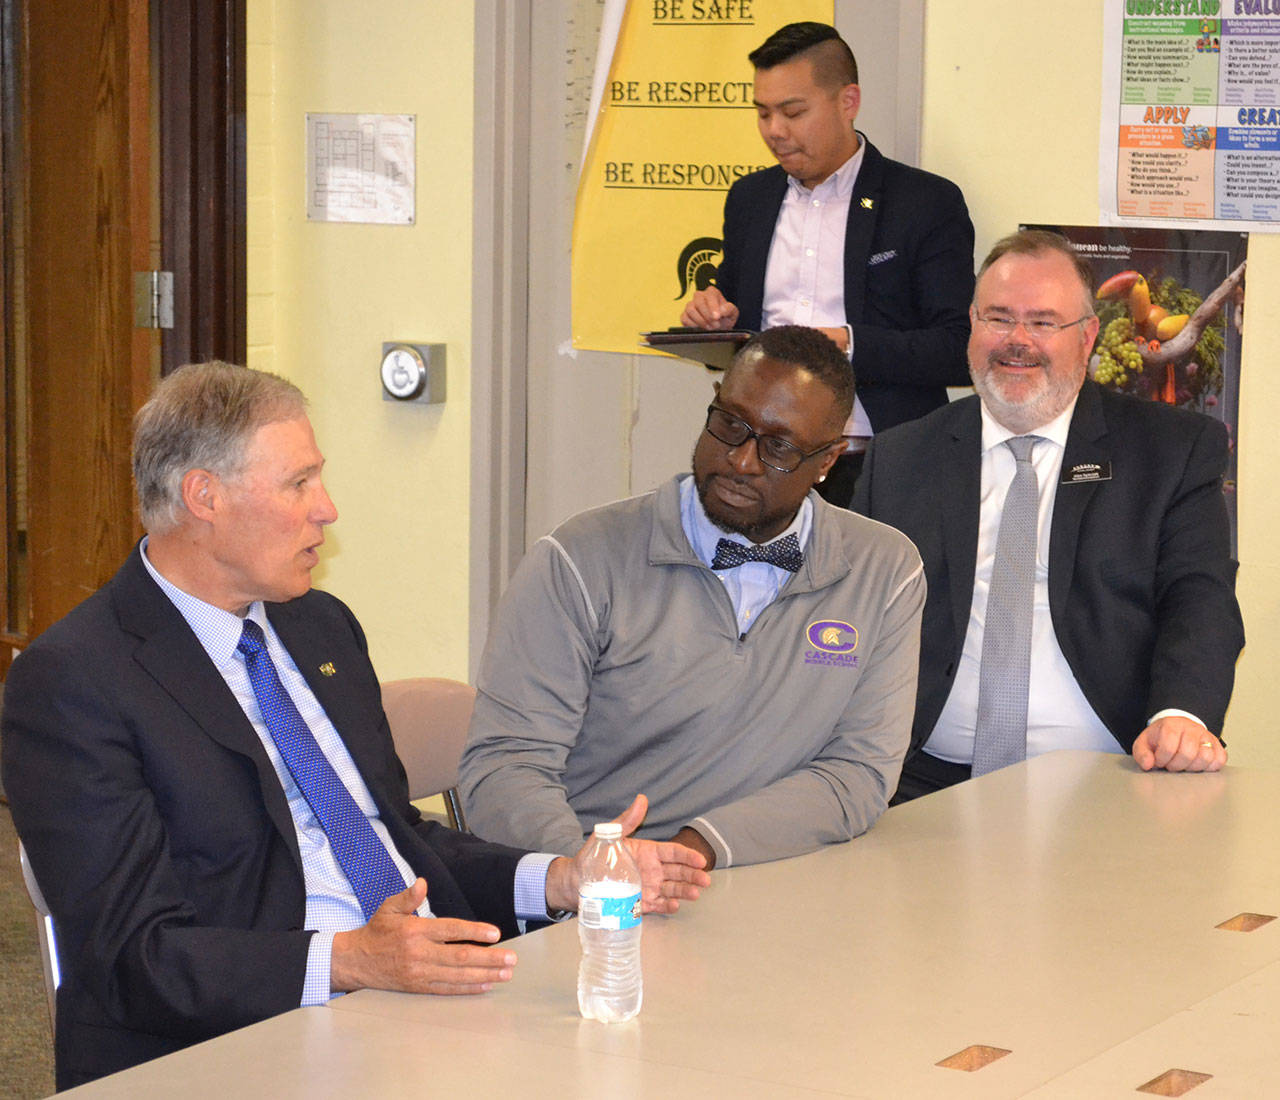 Gov. Jay Inslee sits down with teachers, support staff, Cascade Middle School Principal Isaiah Johnson, middle, and Superintendent Alan Spicciati, right, to discuss programming during his recent visit to Auburn. ROBERT WHALE, Auburn Reporter